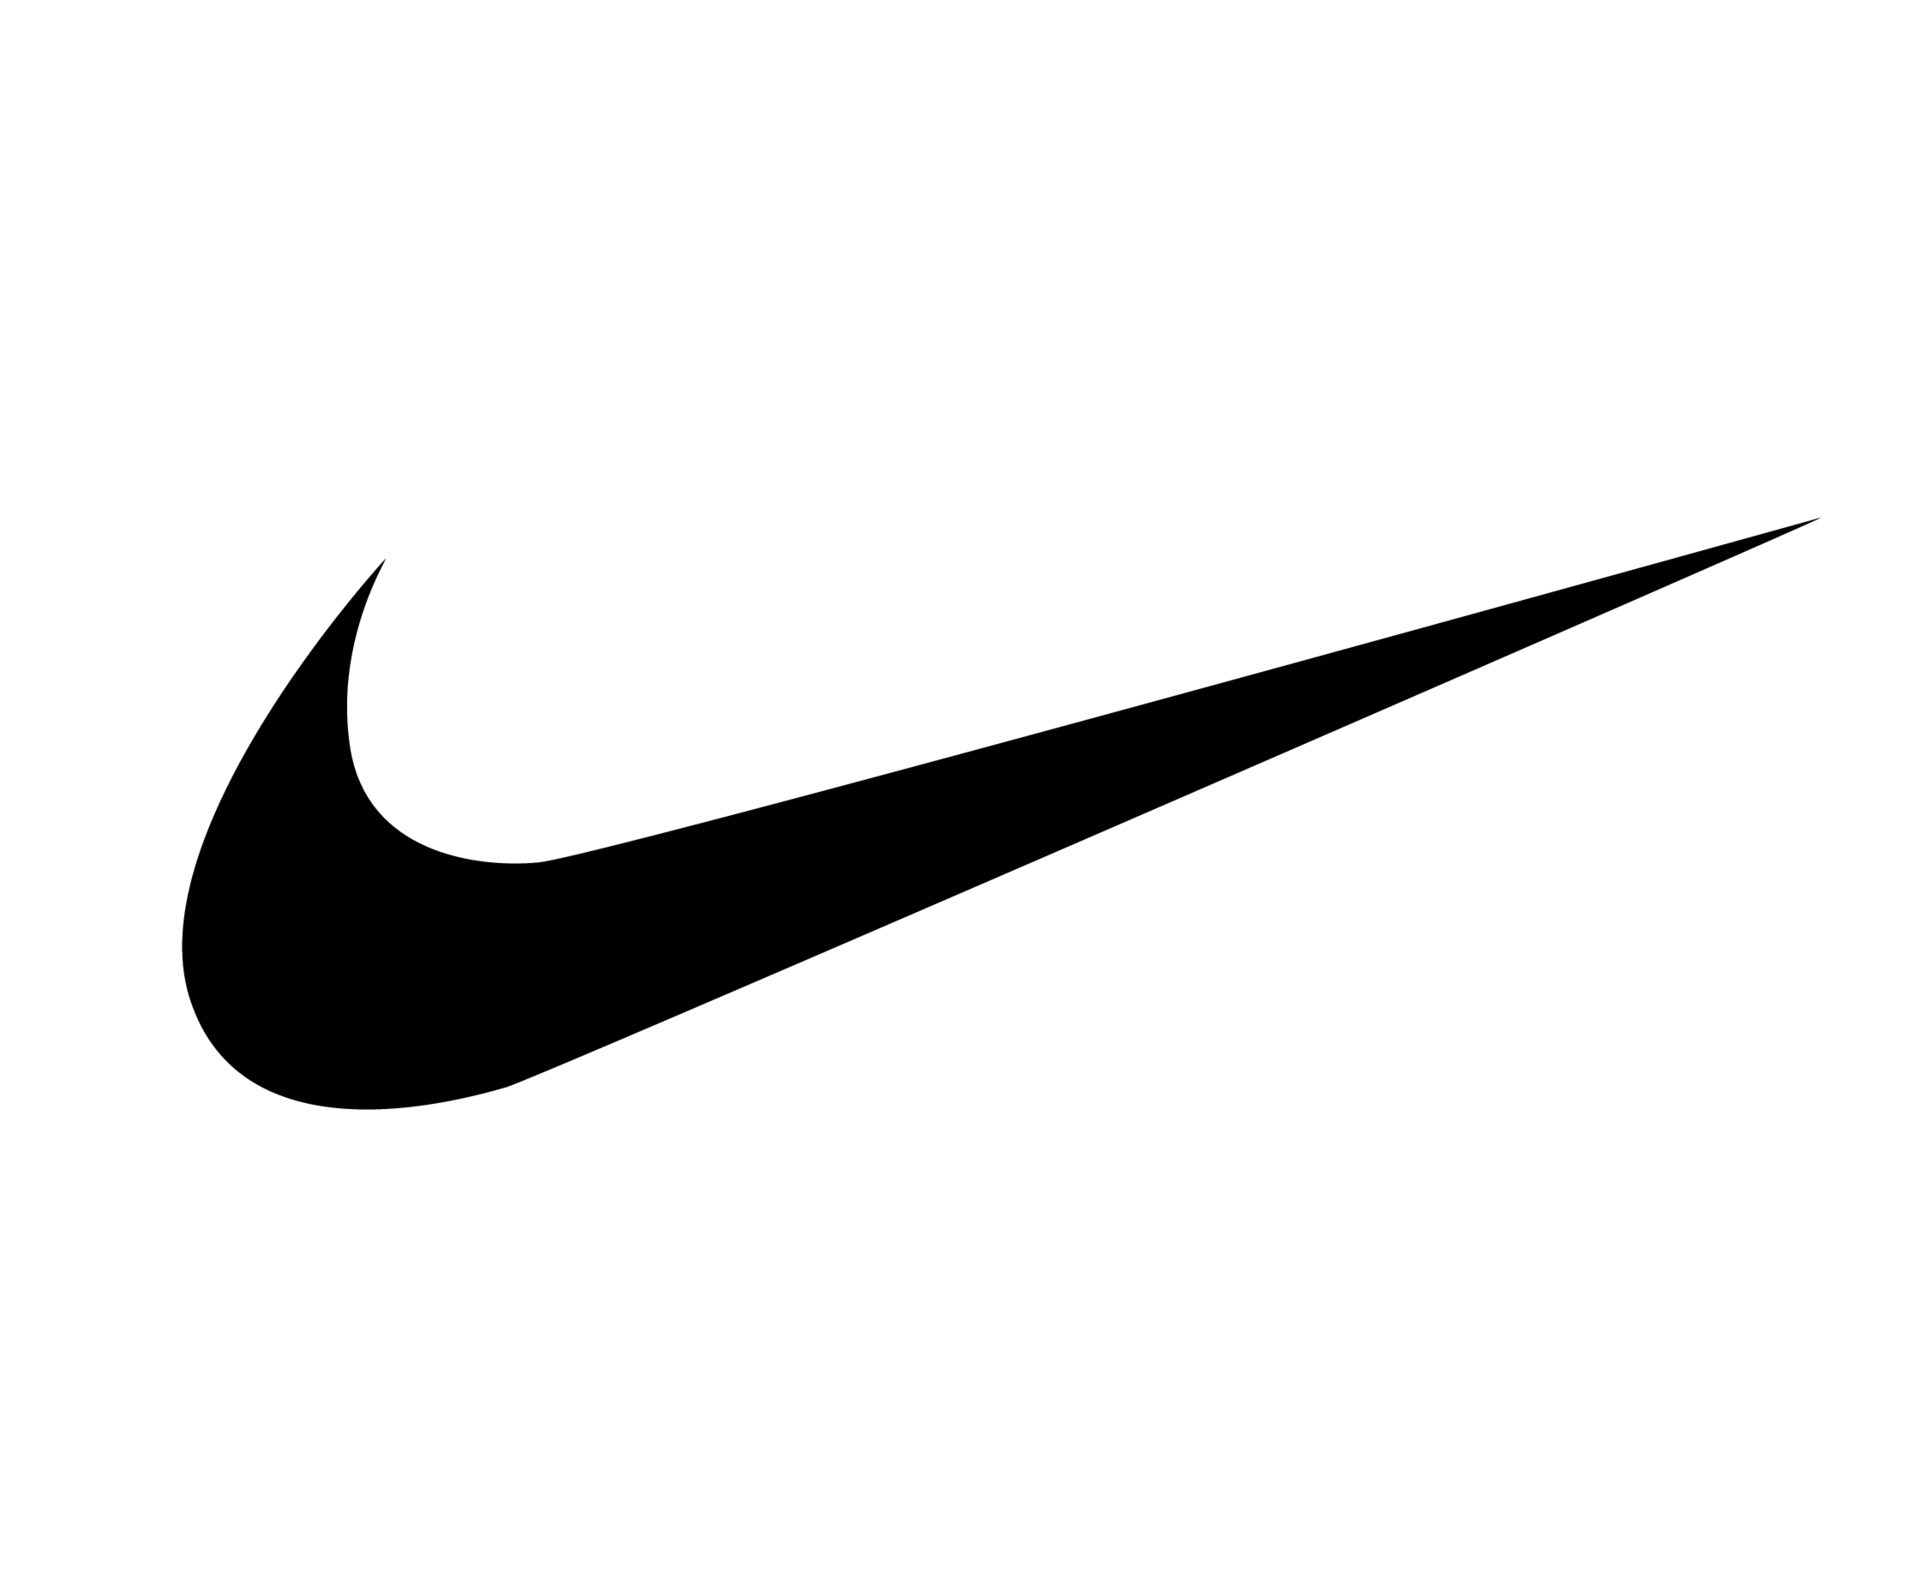 nike-logo-black-clothes-design-icon-abstract-football-illustration-with-white-background-free-vector